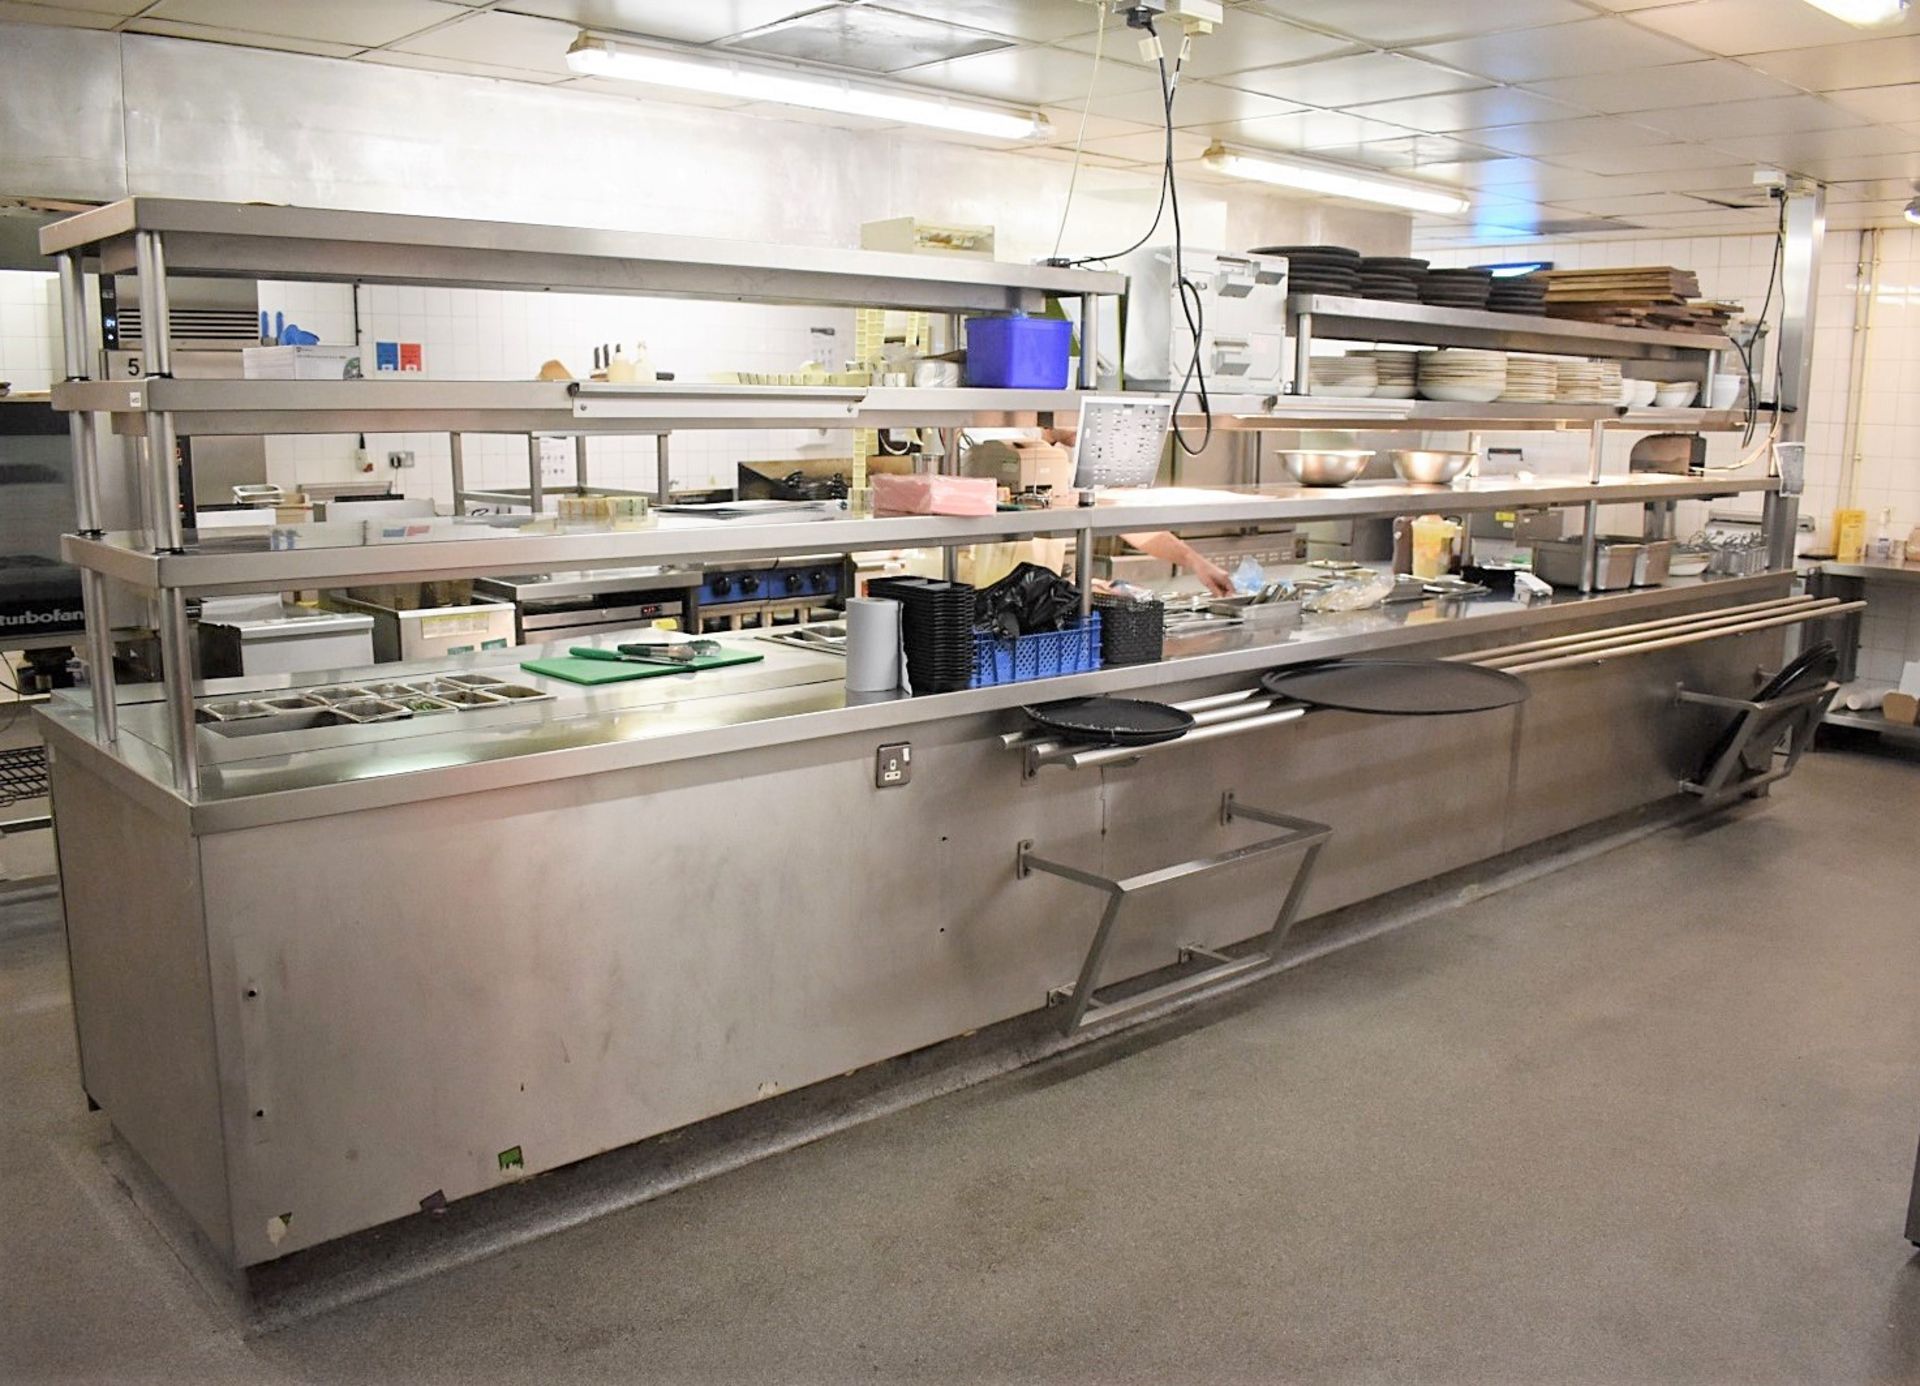 1 x Large Commercial Kitchen Passthrough Heated Gantry Island With Integrated Fosters Undercounter